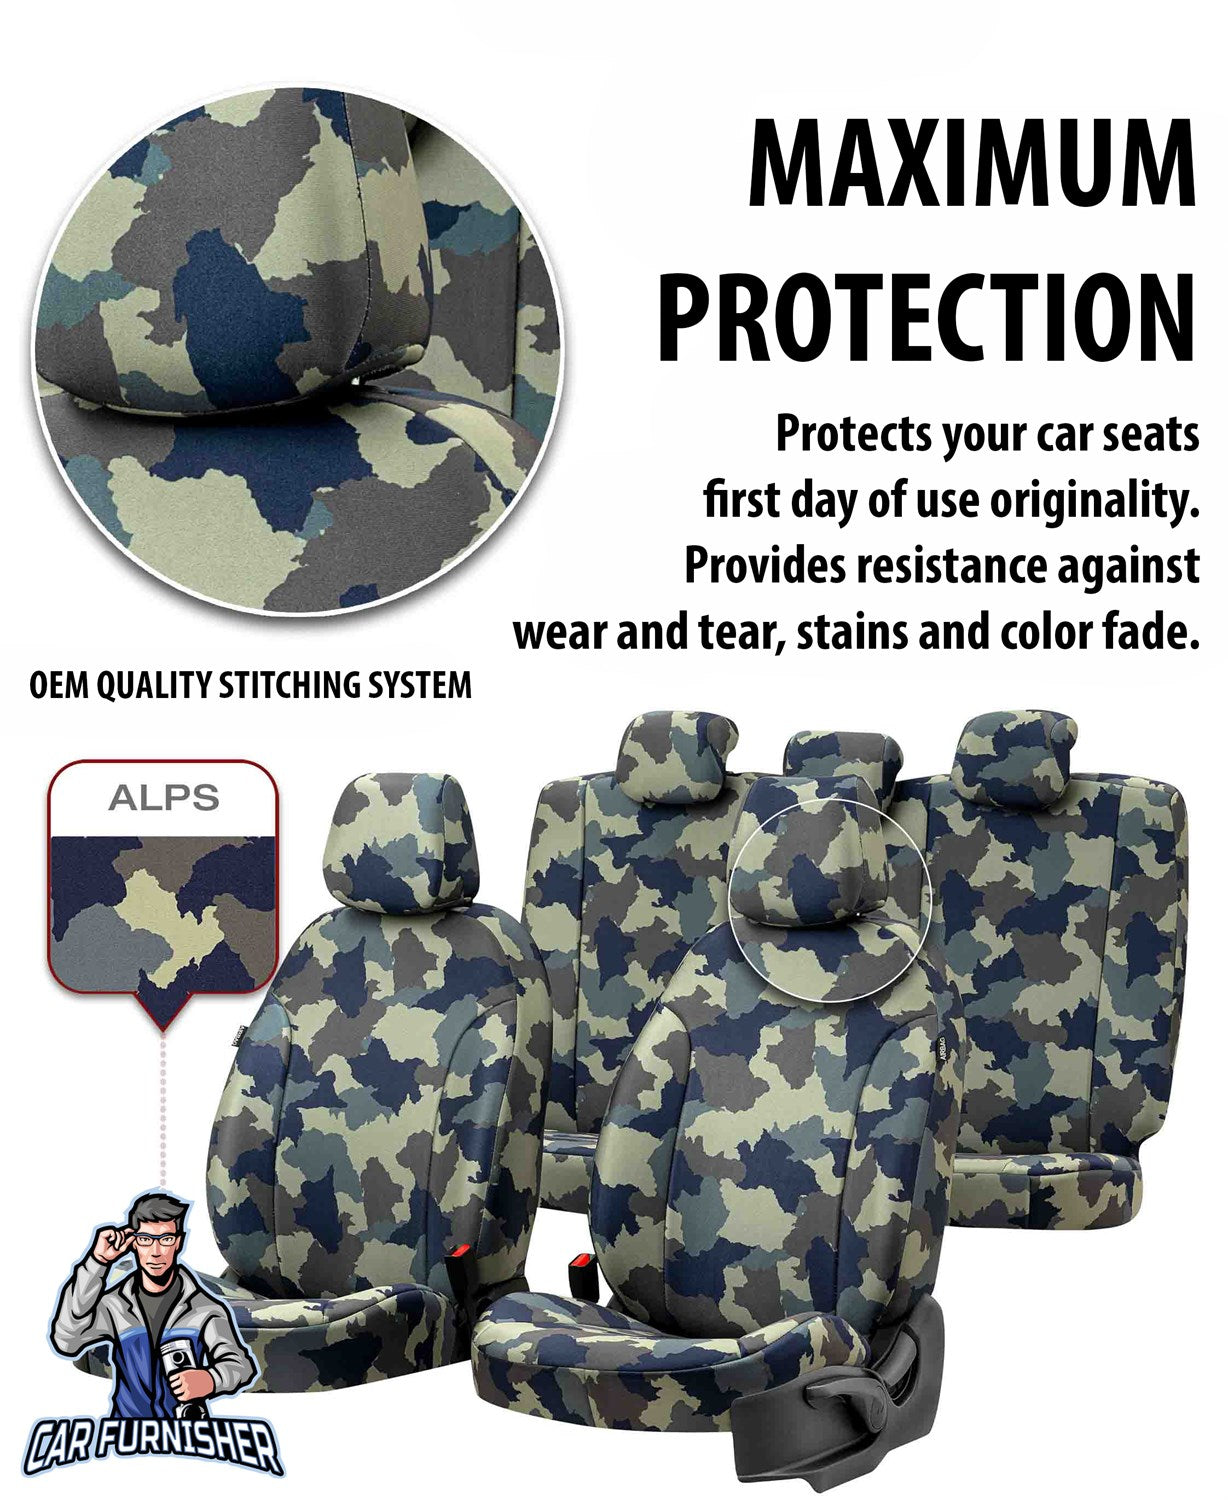 Nissan X-Trail Seat Covers Camouflage Waterproof Design Alps Camo Waterproof Fabric